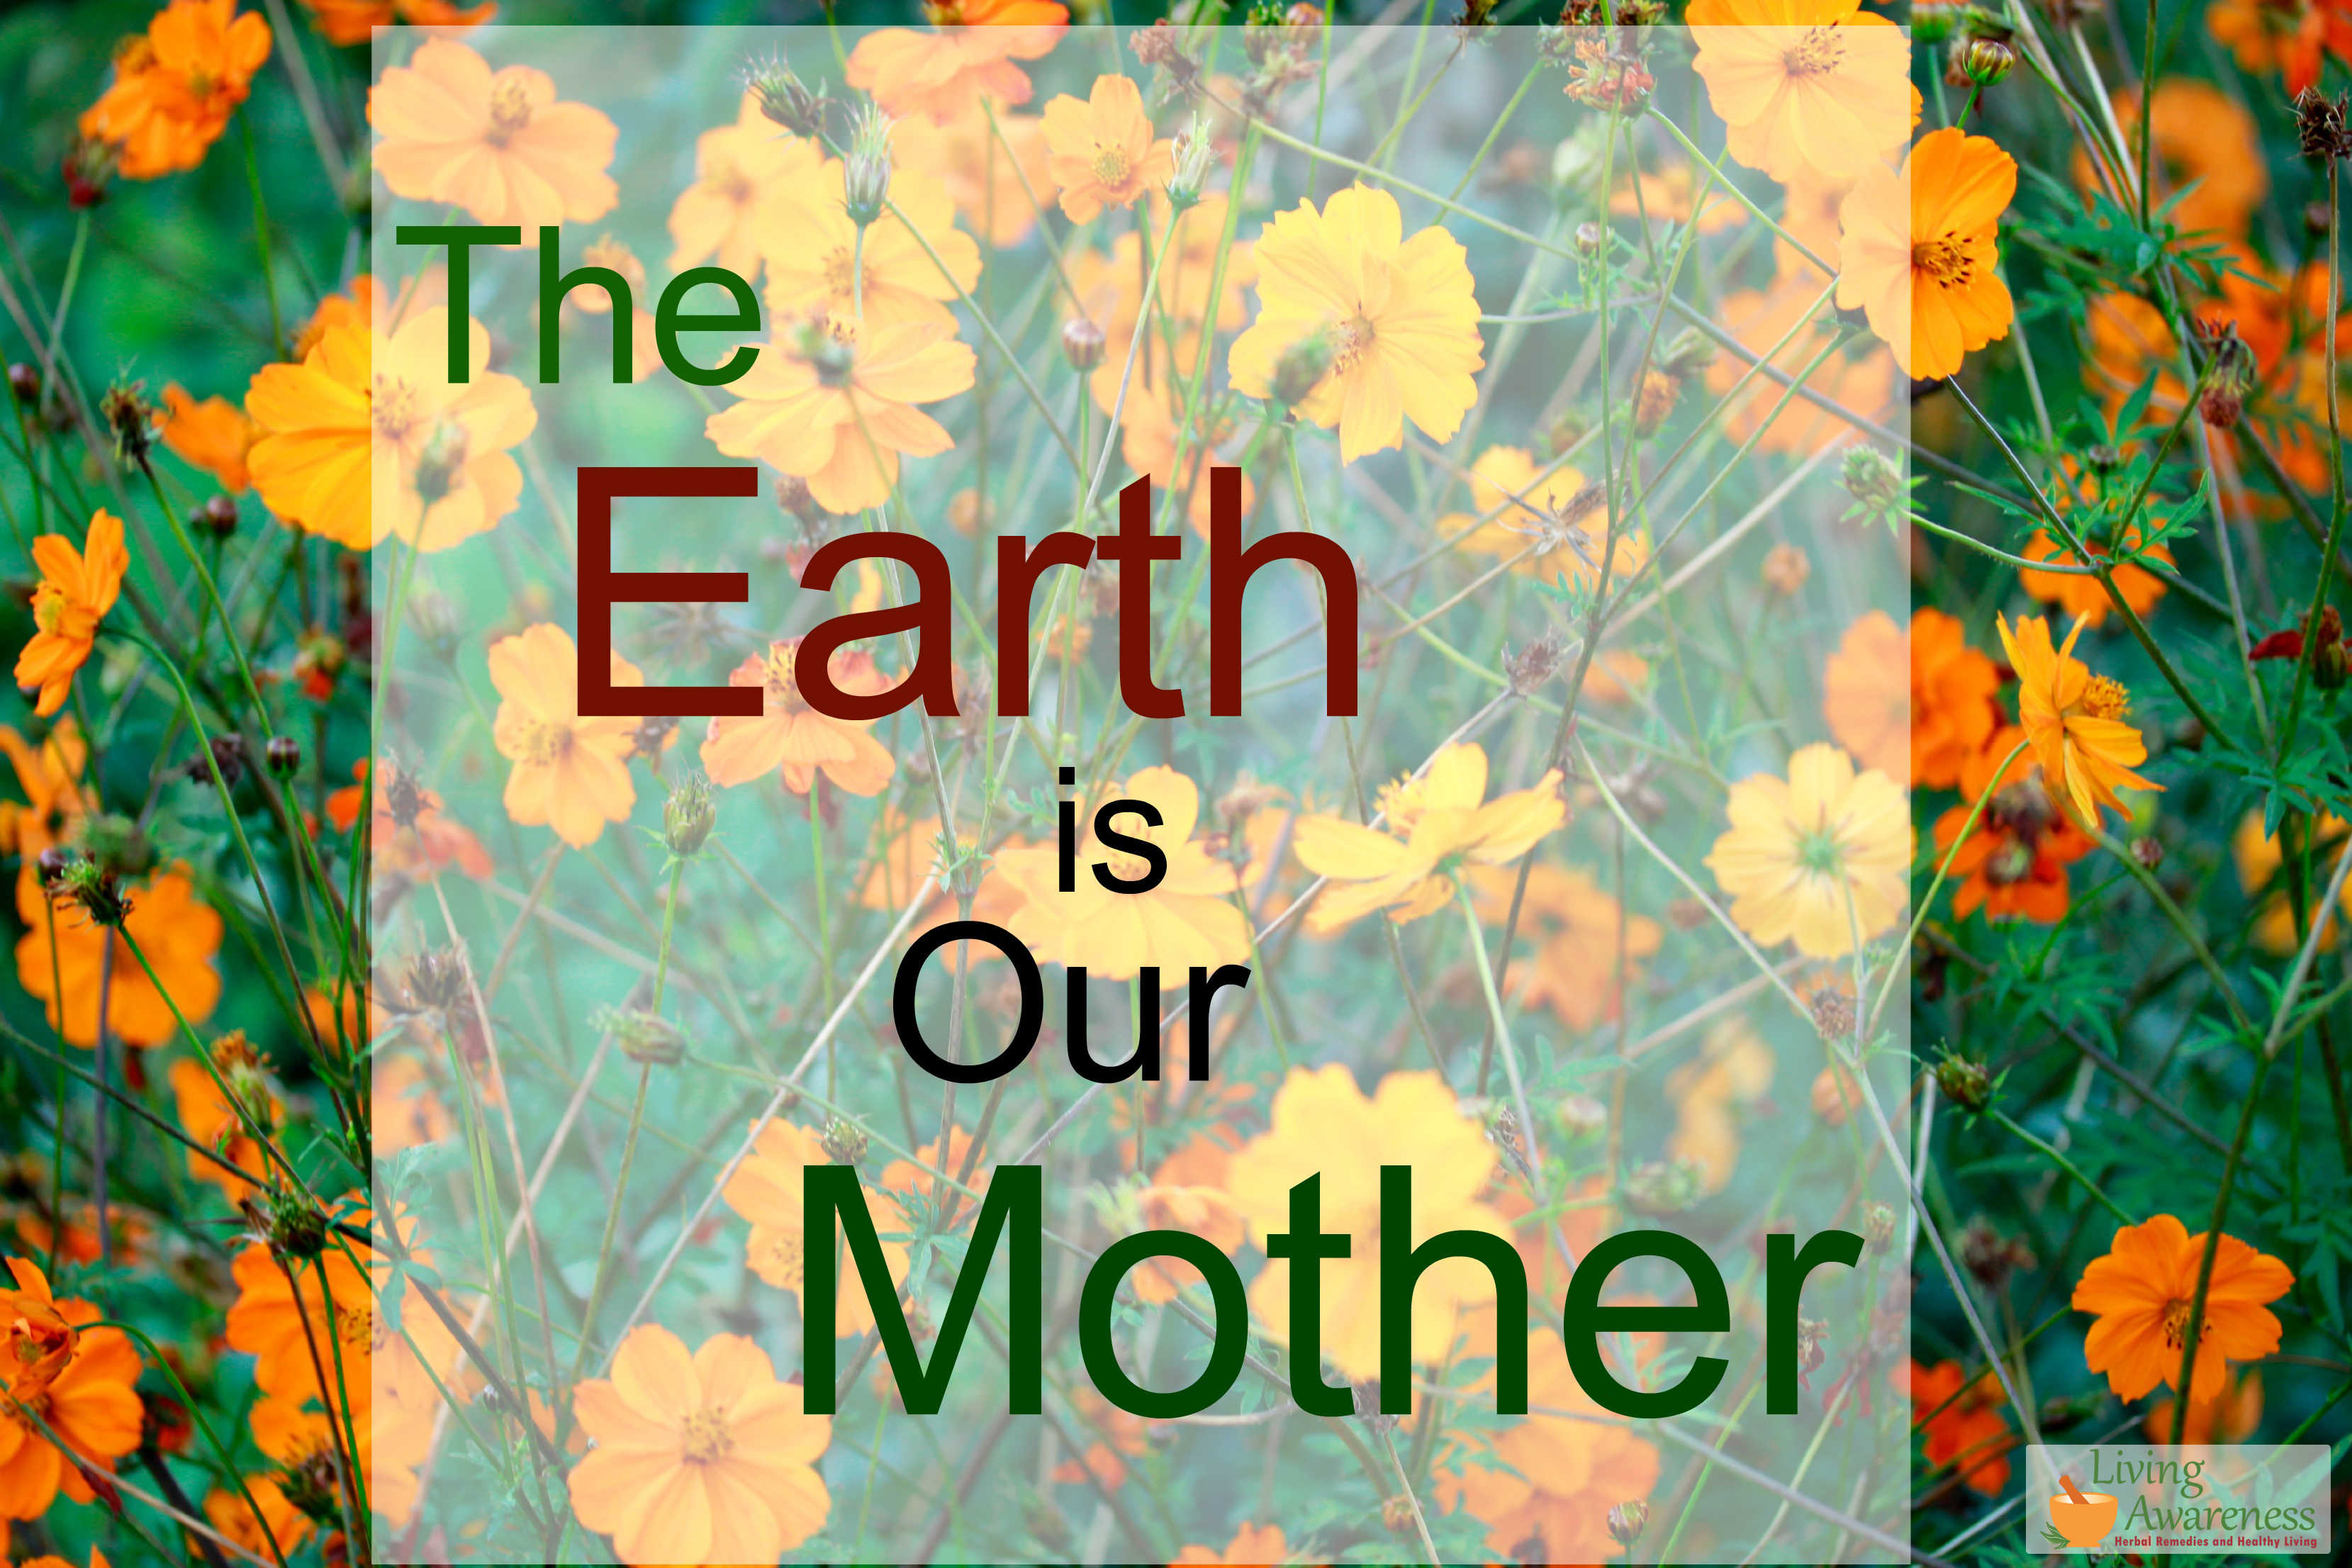 The Earth is Our Mother